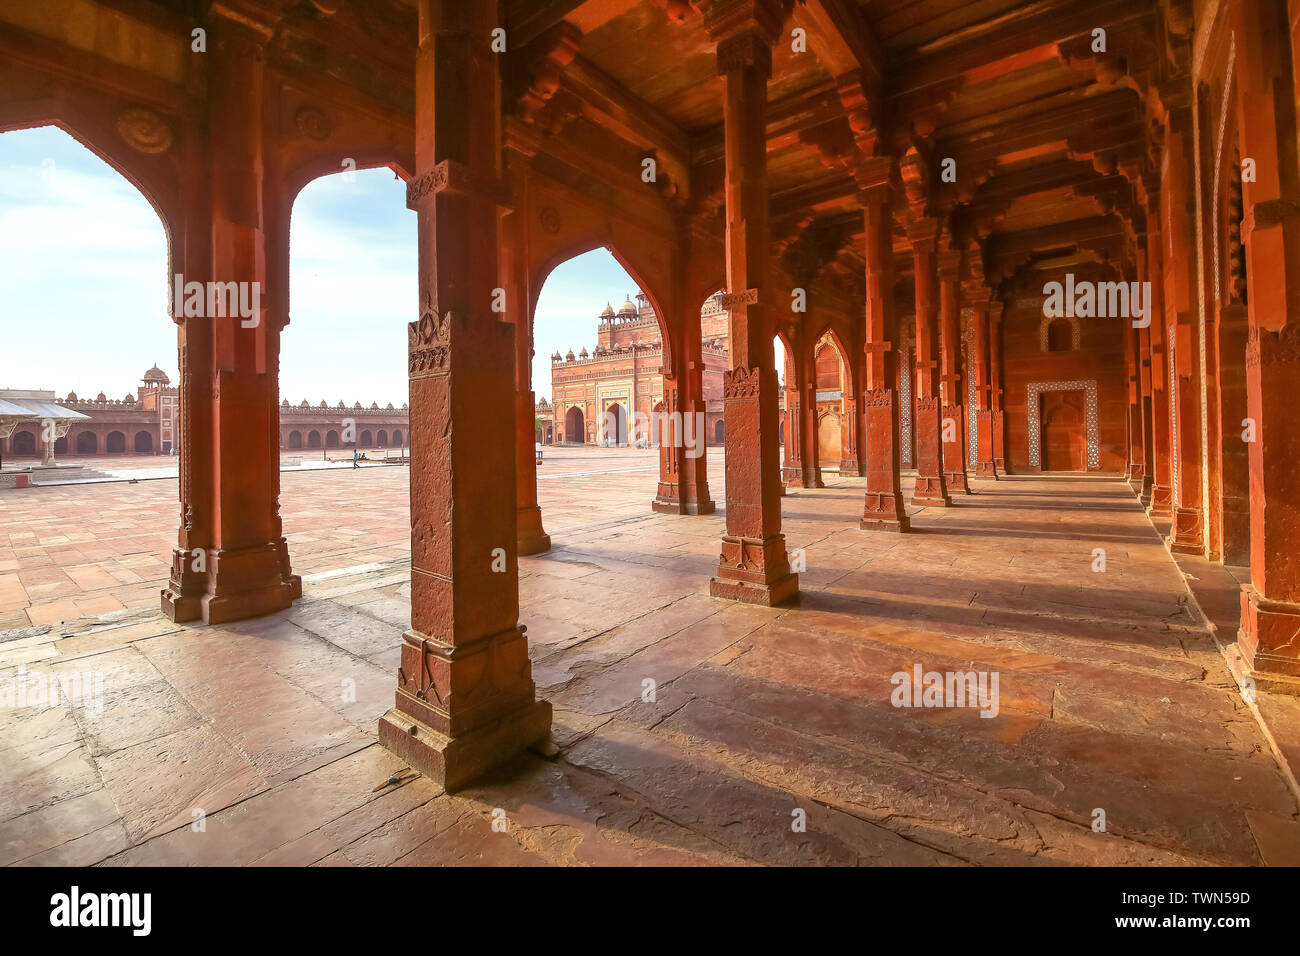 Fatehpur Sikri red sandstone architecture structure with view of columns and largest Indian mughal architecture gateway known as the 'Buland Darwaza'. Stock Photo